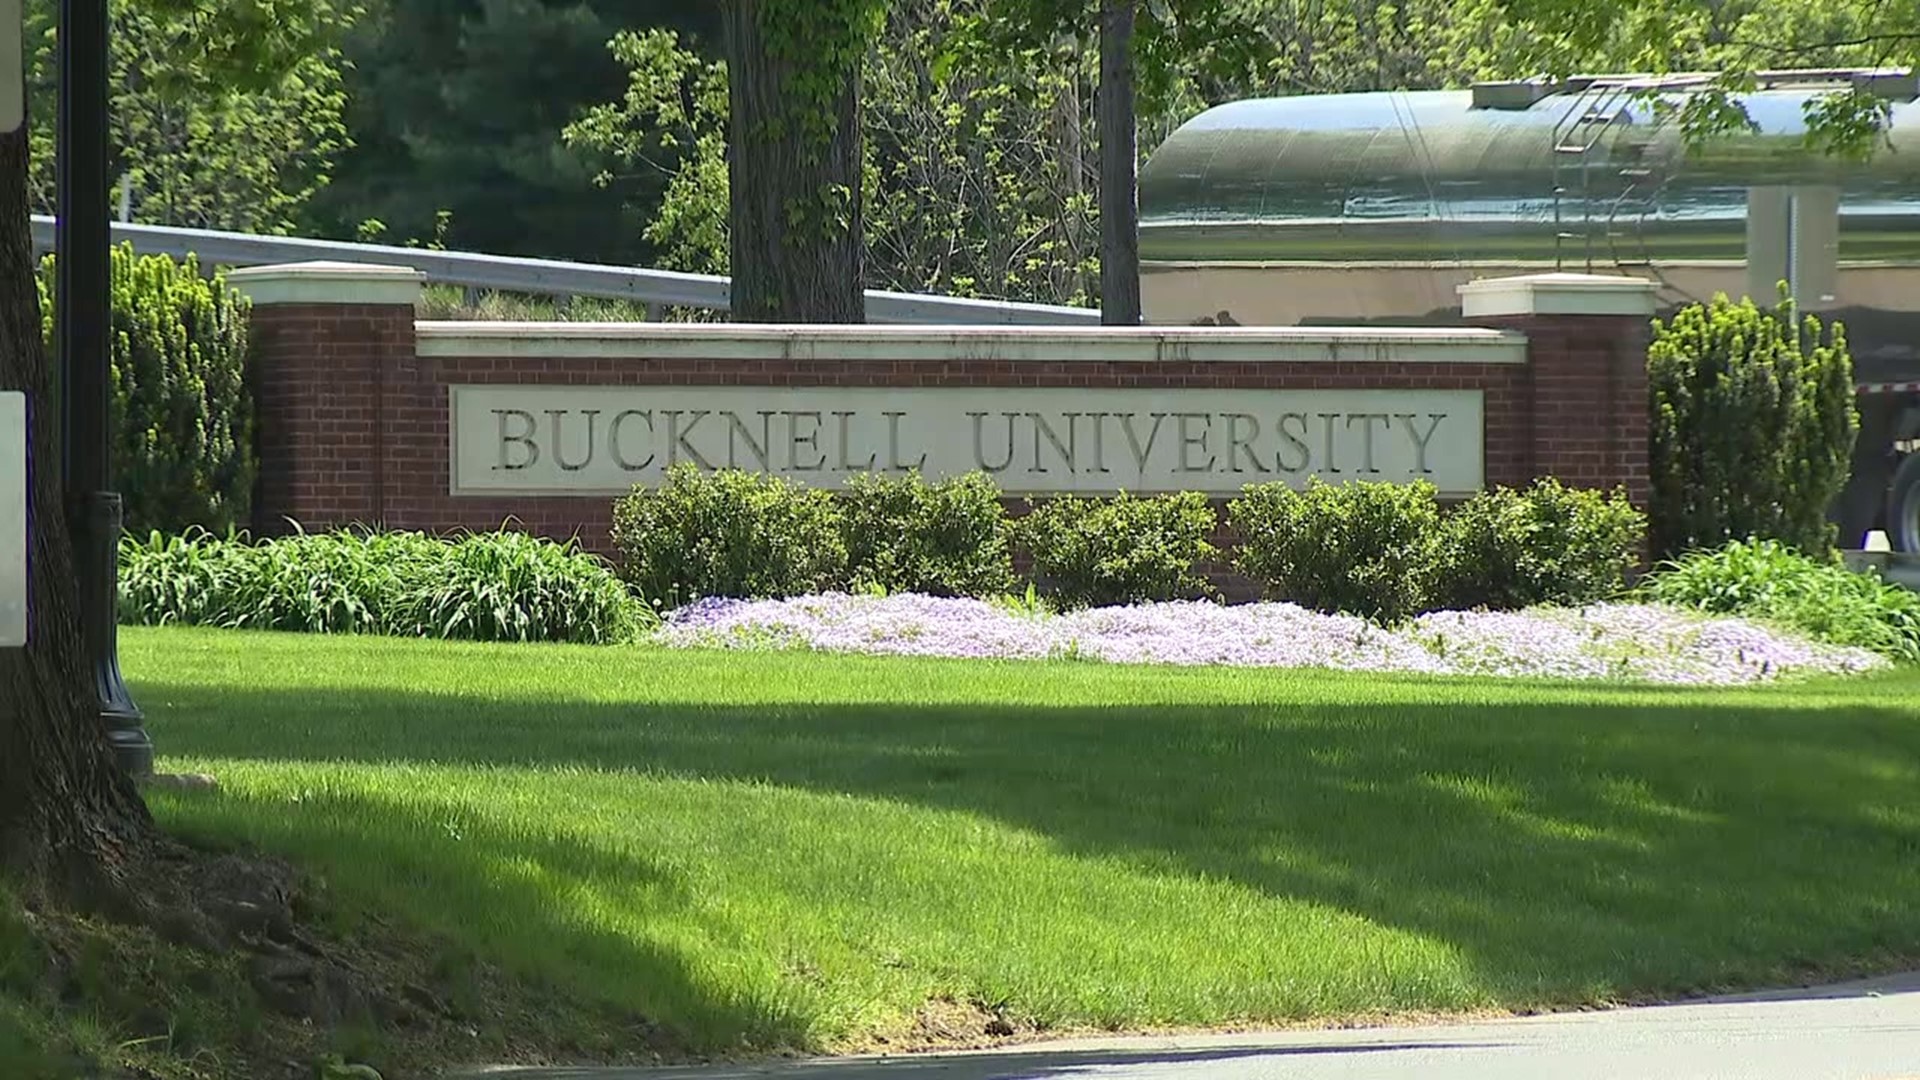 Bucknell University officials say swift action was taken after a swastika was found in a residence hall on campus.